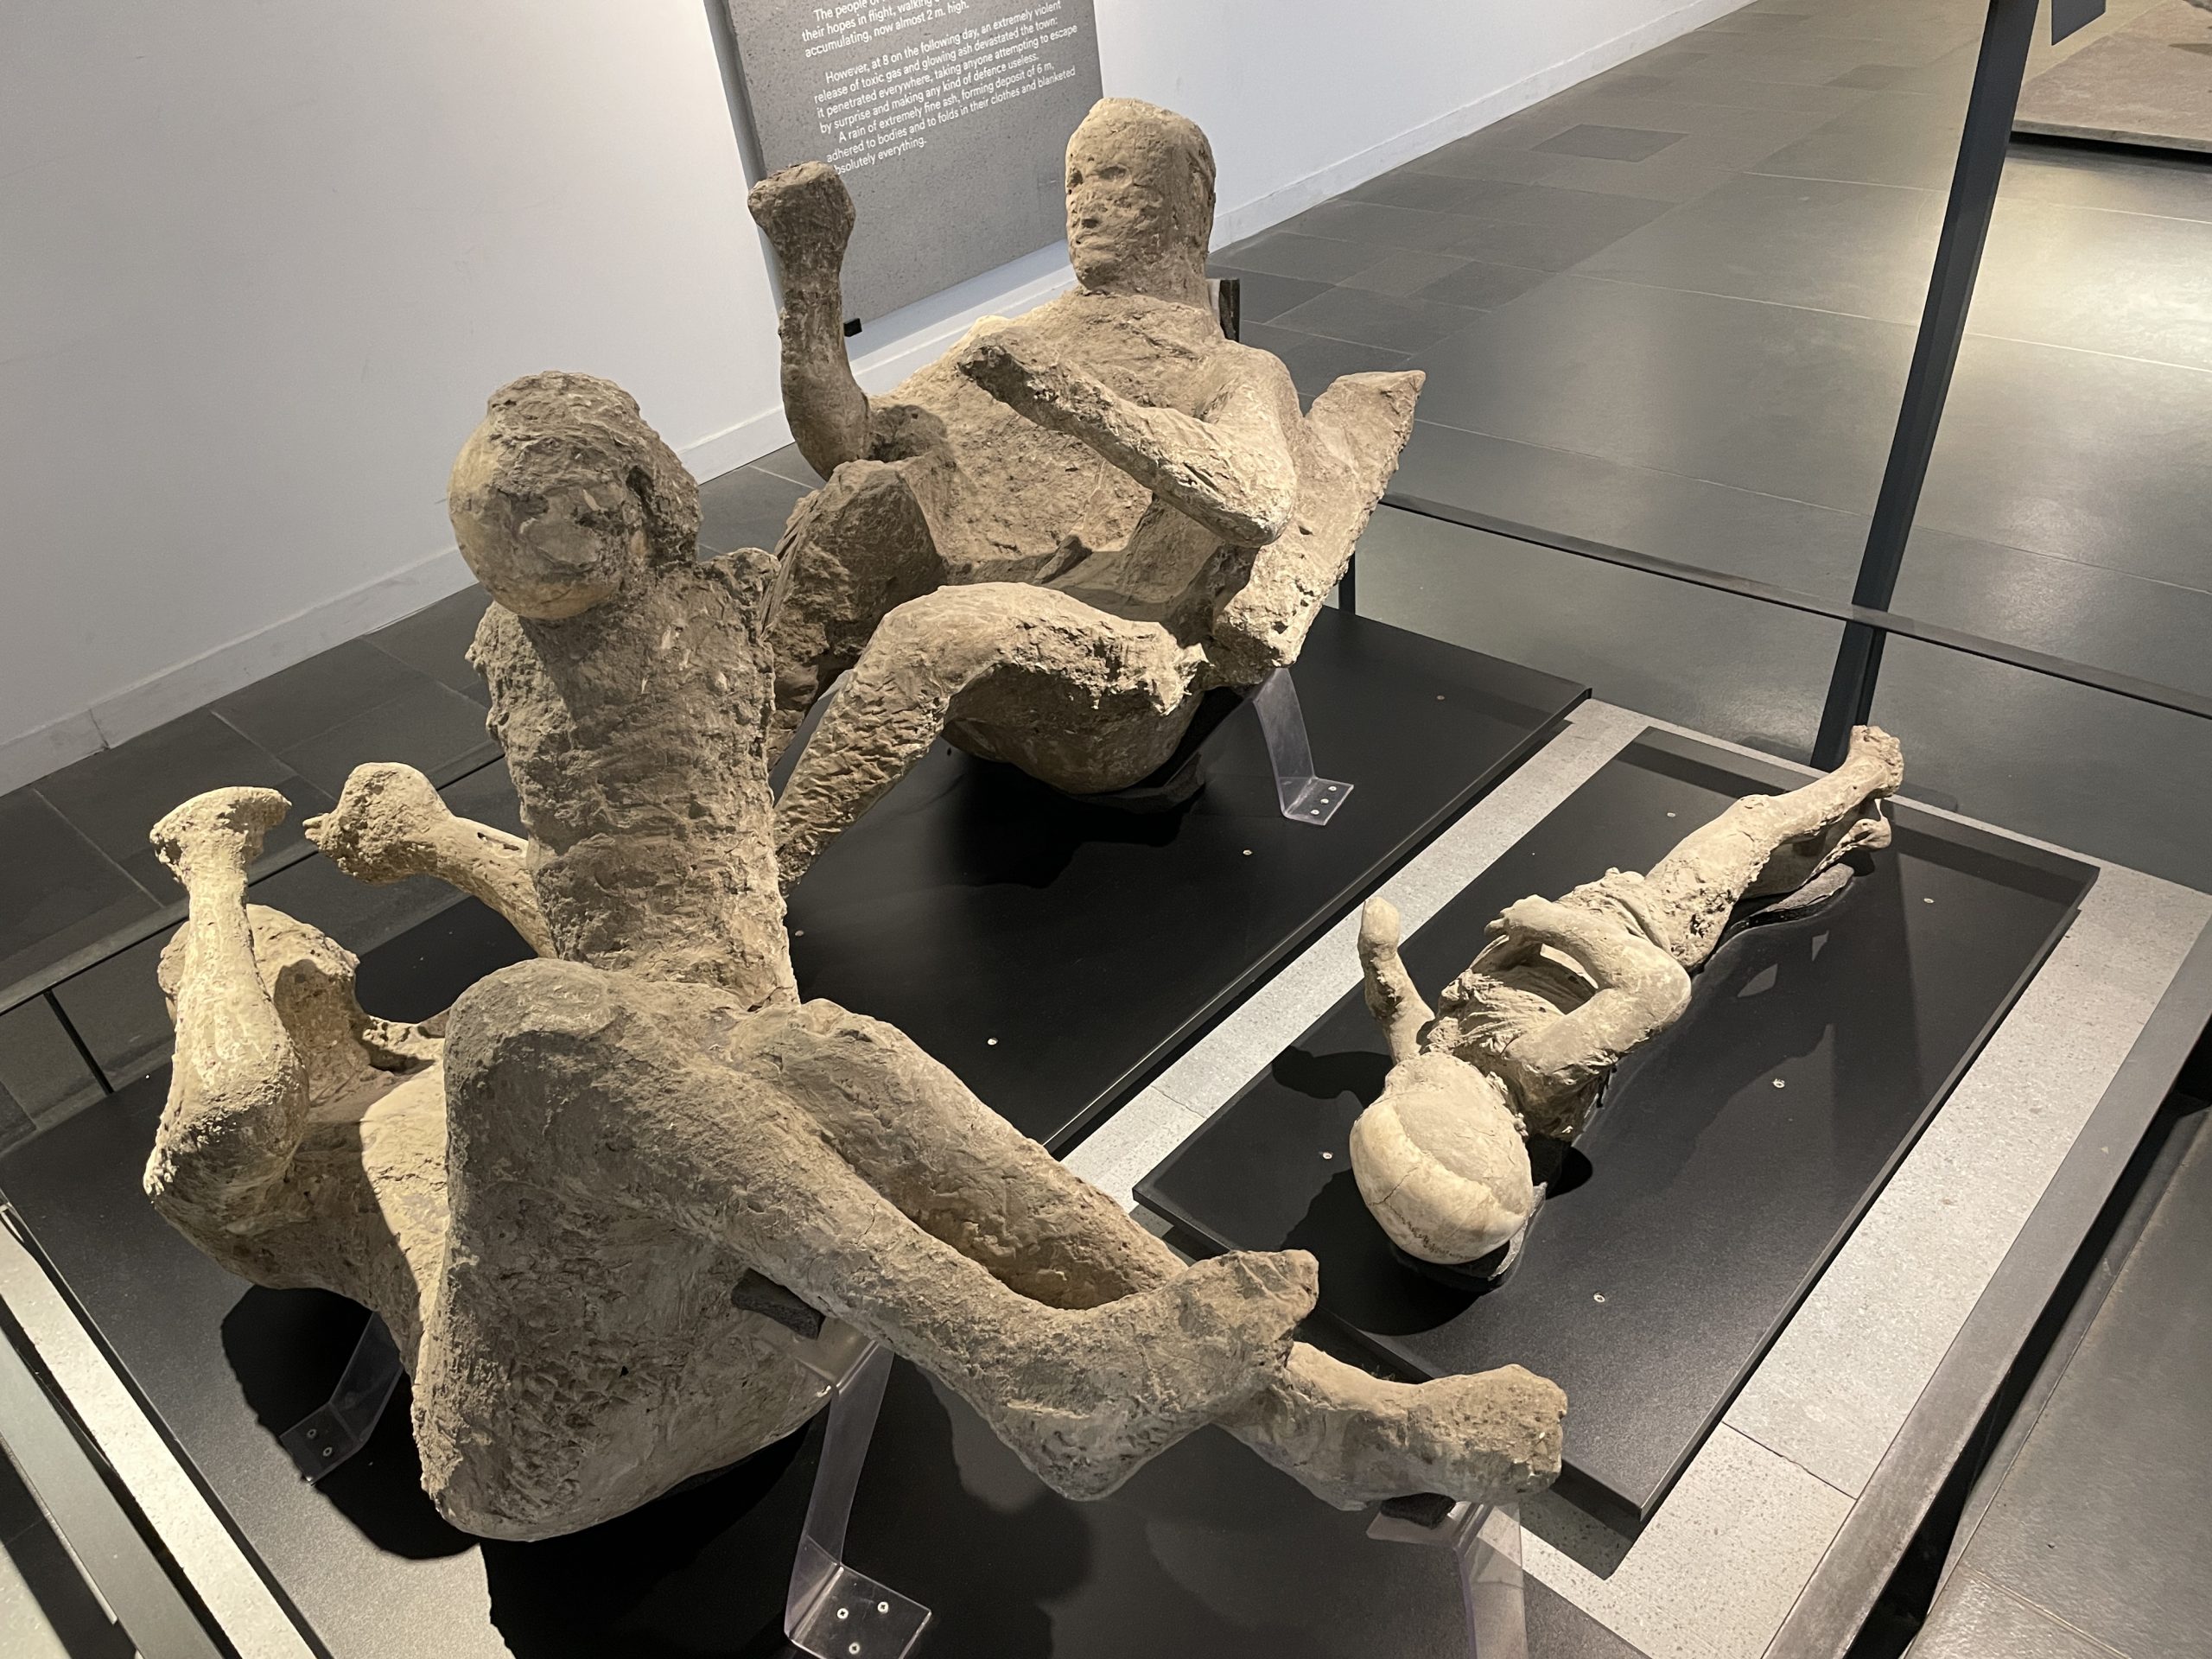 The casts of the victims created by pouring plaster into the hollows left by the bodies give a hauntingly realistic depiction of the tragedy that unfolded during the eruption.